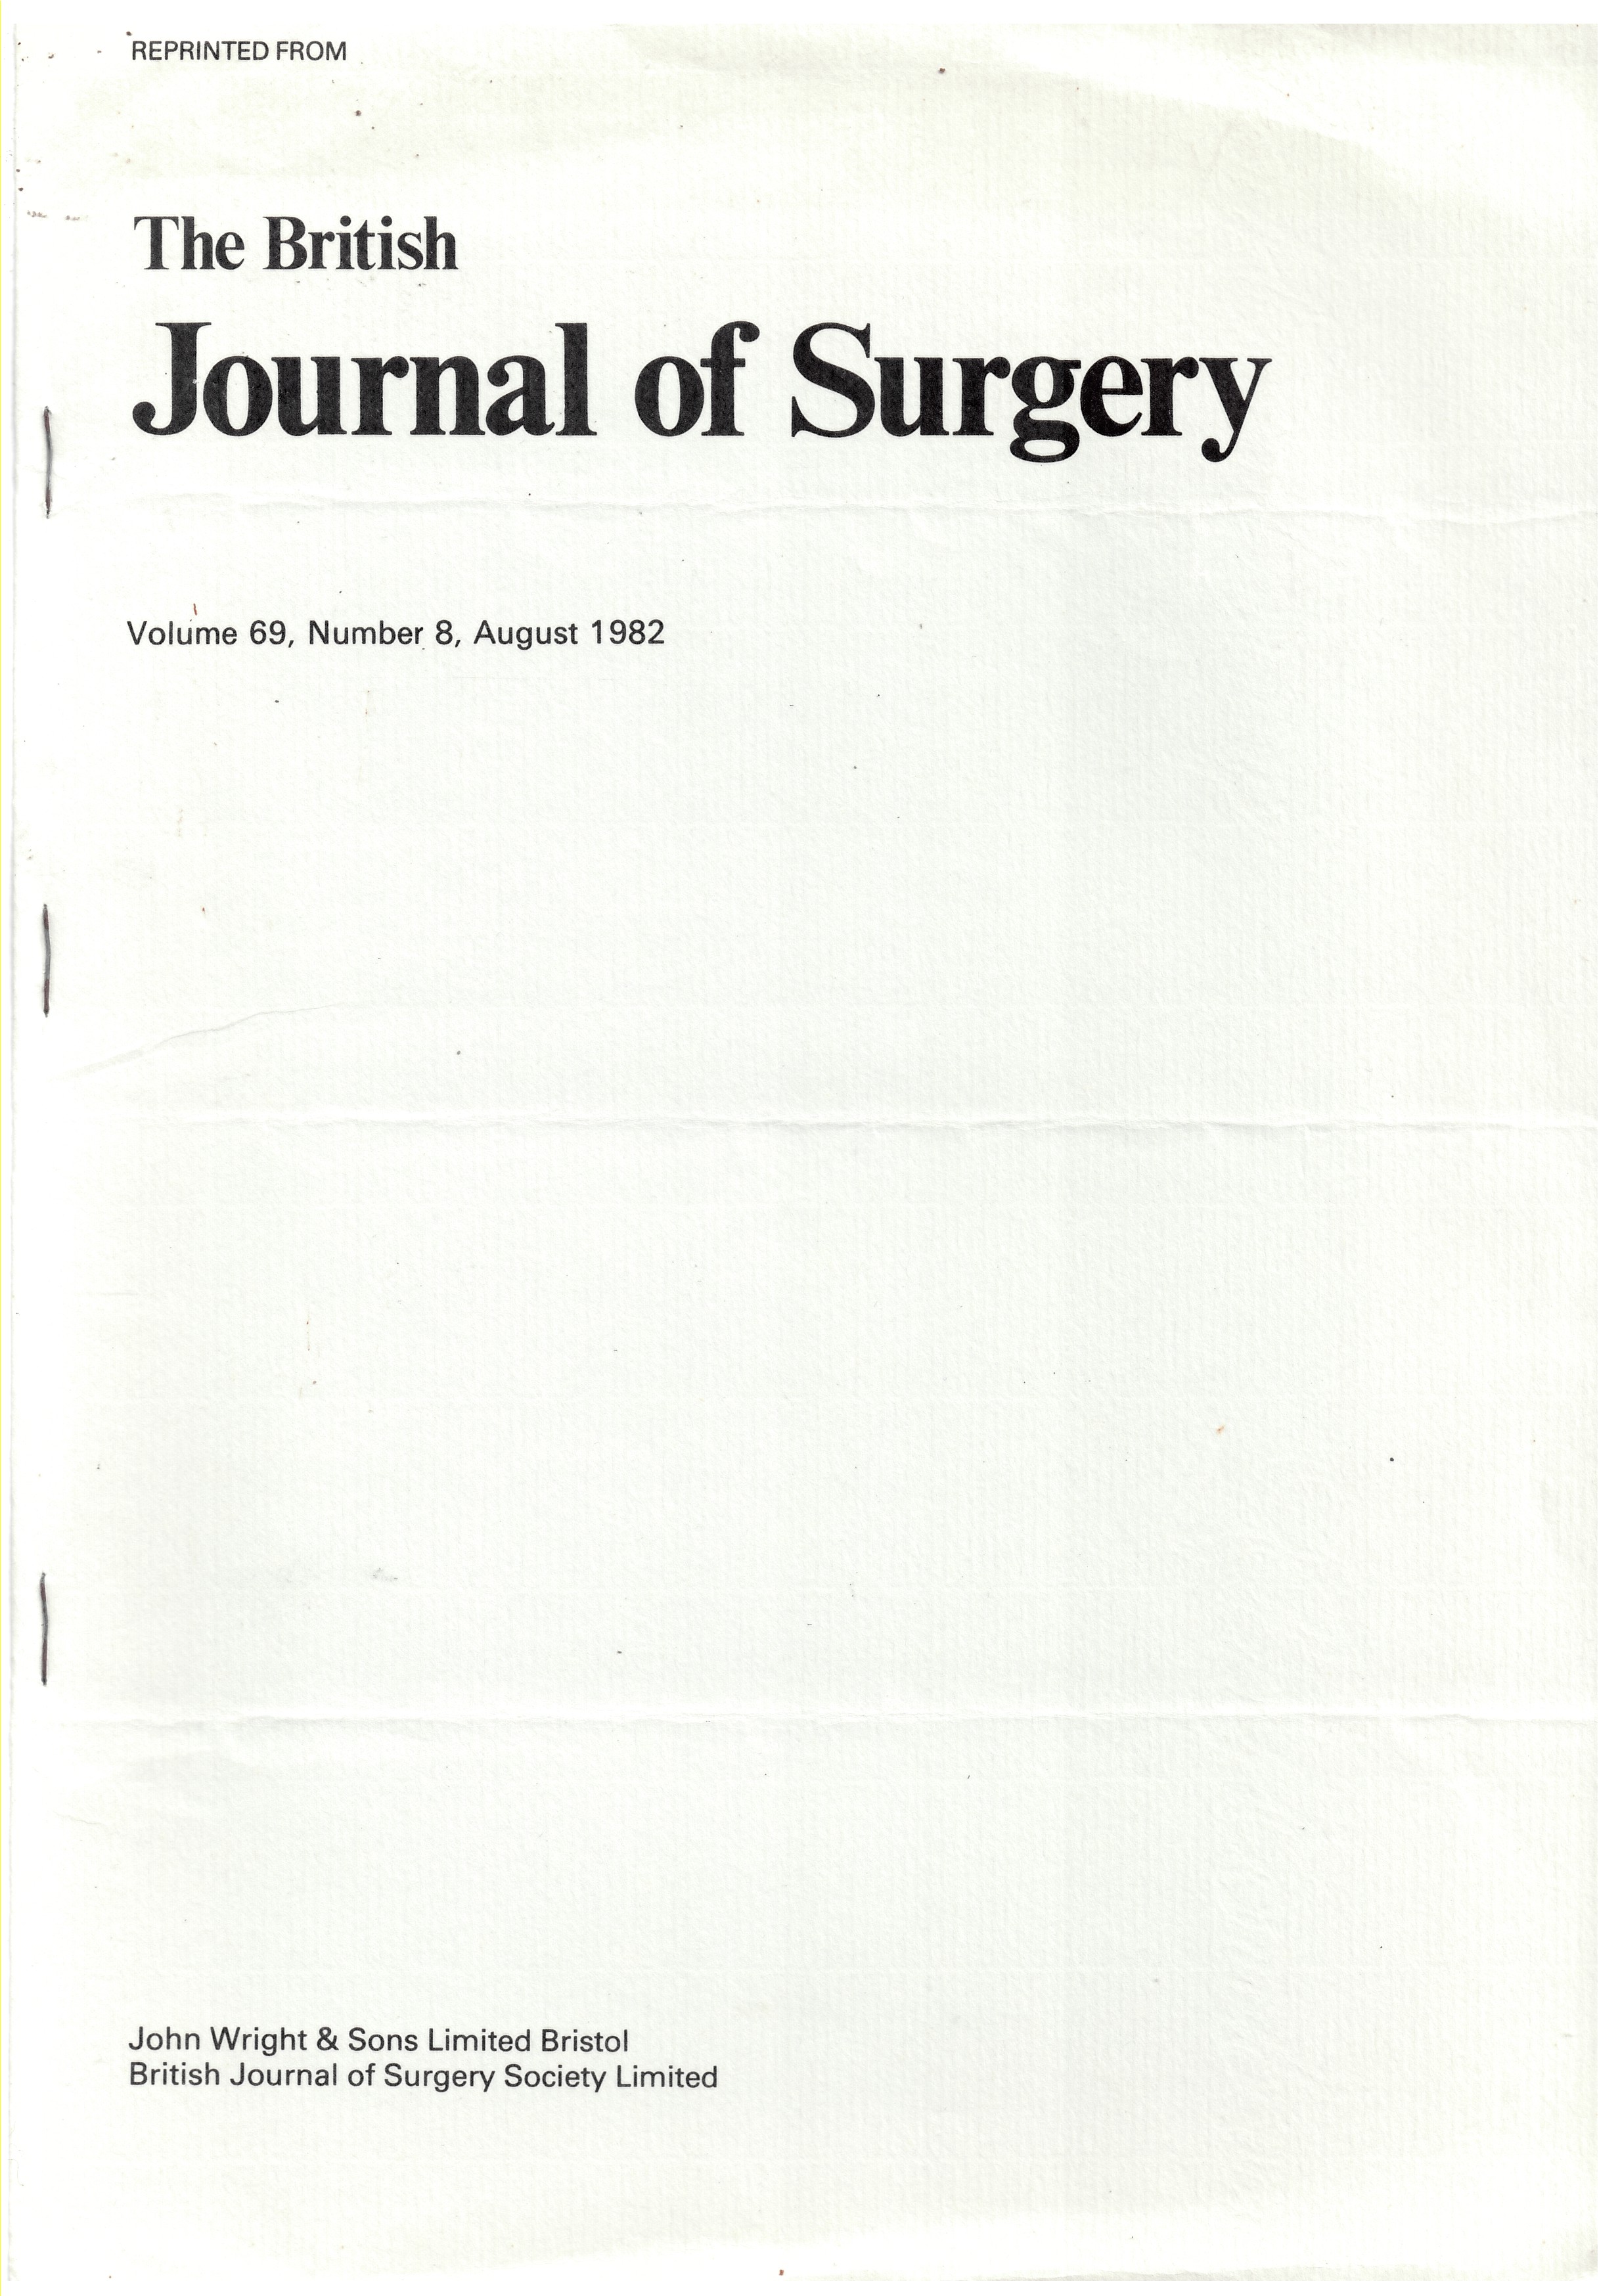 HENRY, M. M. , A. G. PARKS & M. SWASH - The Pelvic Floor Musculature in the Descending Perineum Syndrome. Reprinted from the British Journal of Surgery. Volume 69, Number 8, August 1982